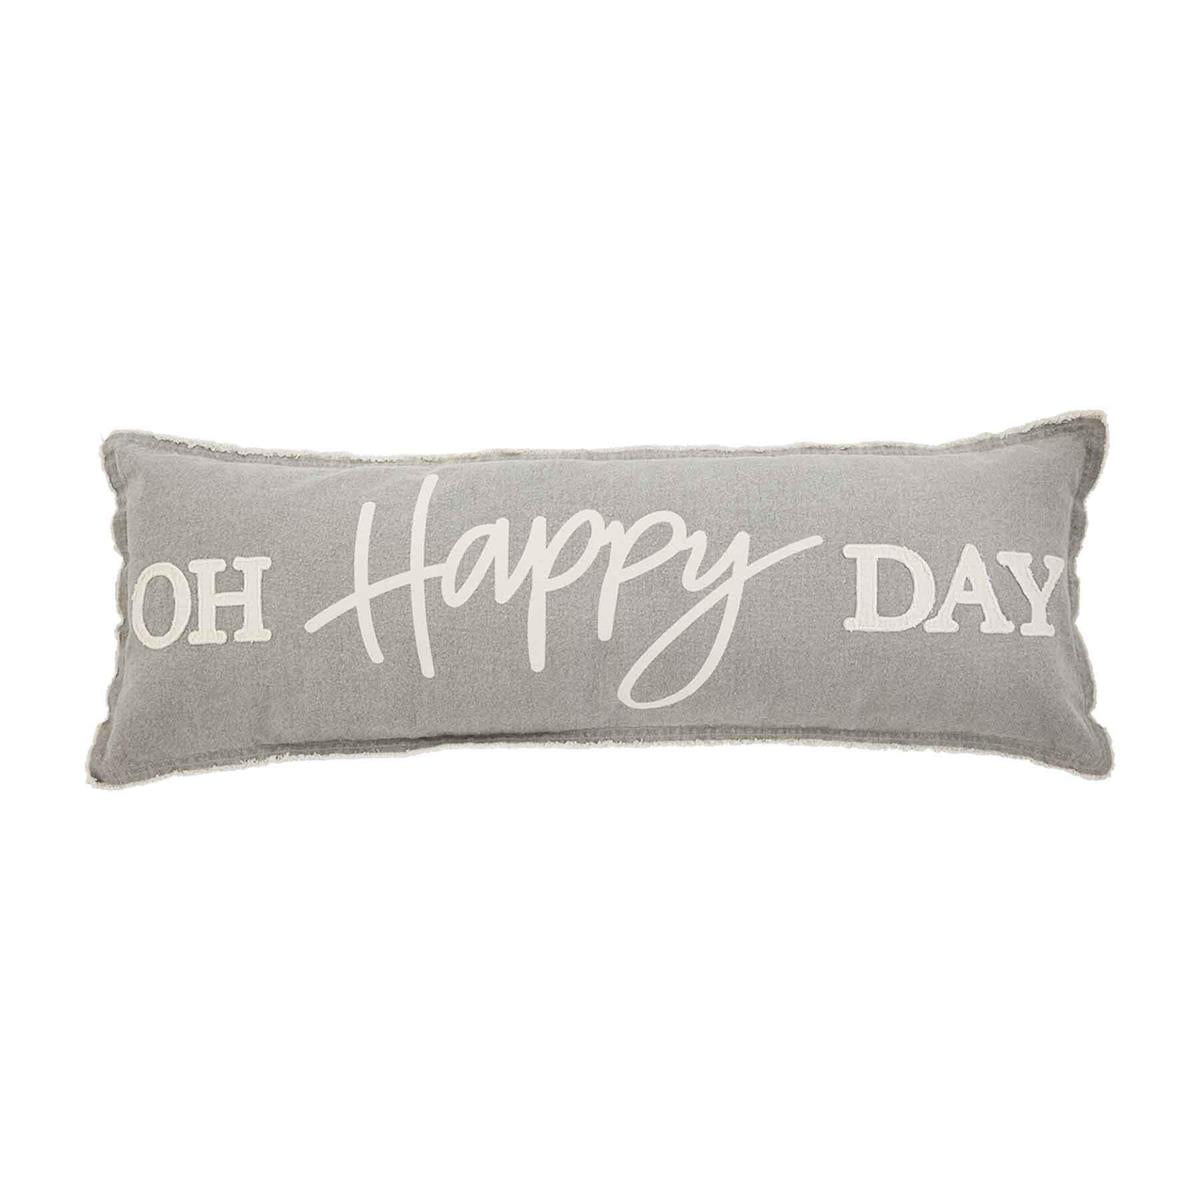 A long grey pillow that reads "Oh Happy Day" in white font.